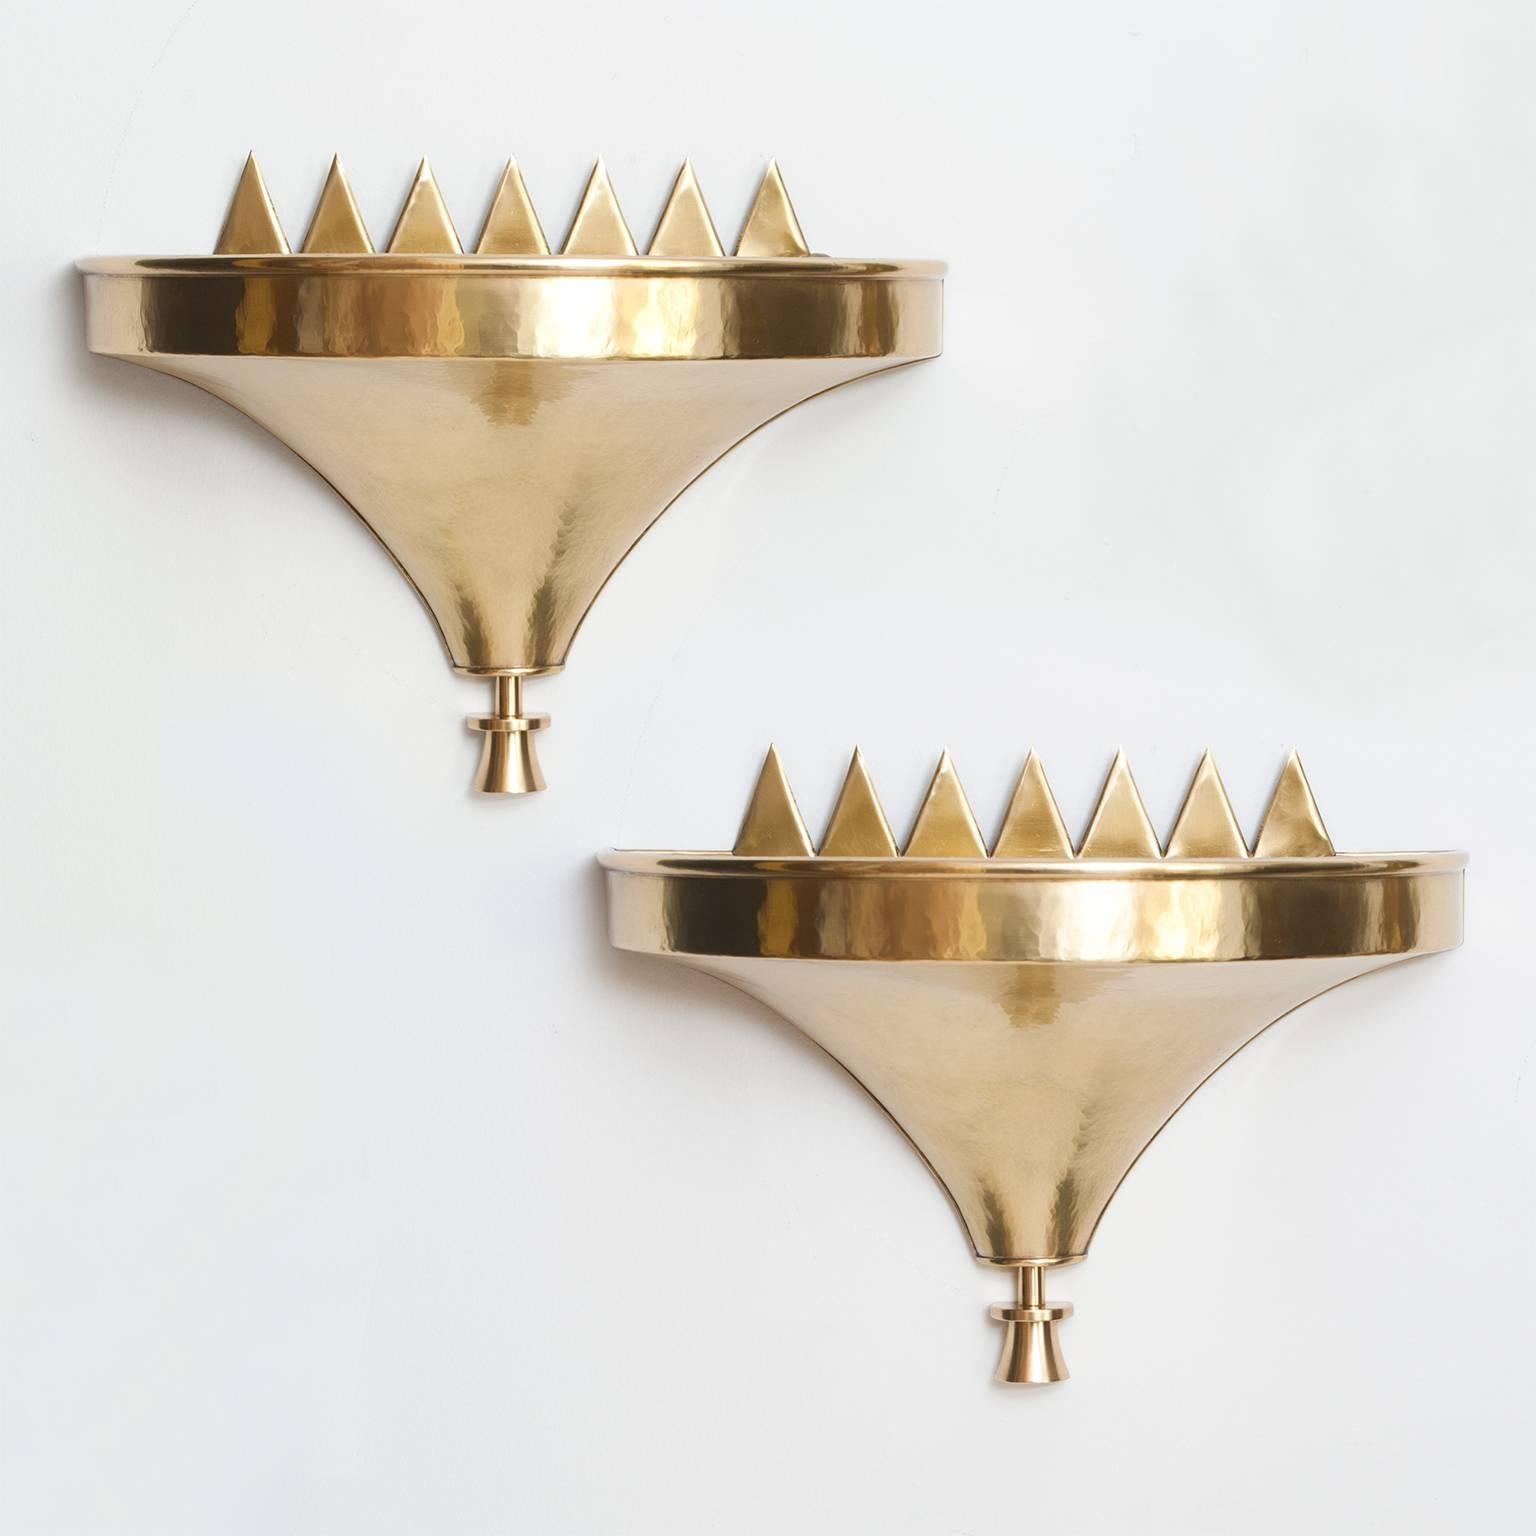 Pair of Art Deco demilune hammered and polished brass sconces with stylized flames designed by Lars Holmström for Arvika, Sweden, 1925. Impressed mark on back.
The sconces are newly polished and lacquered and rewired with three standard base